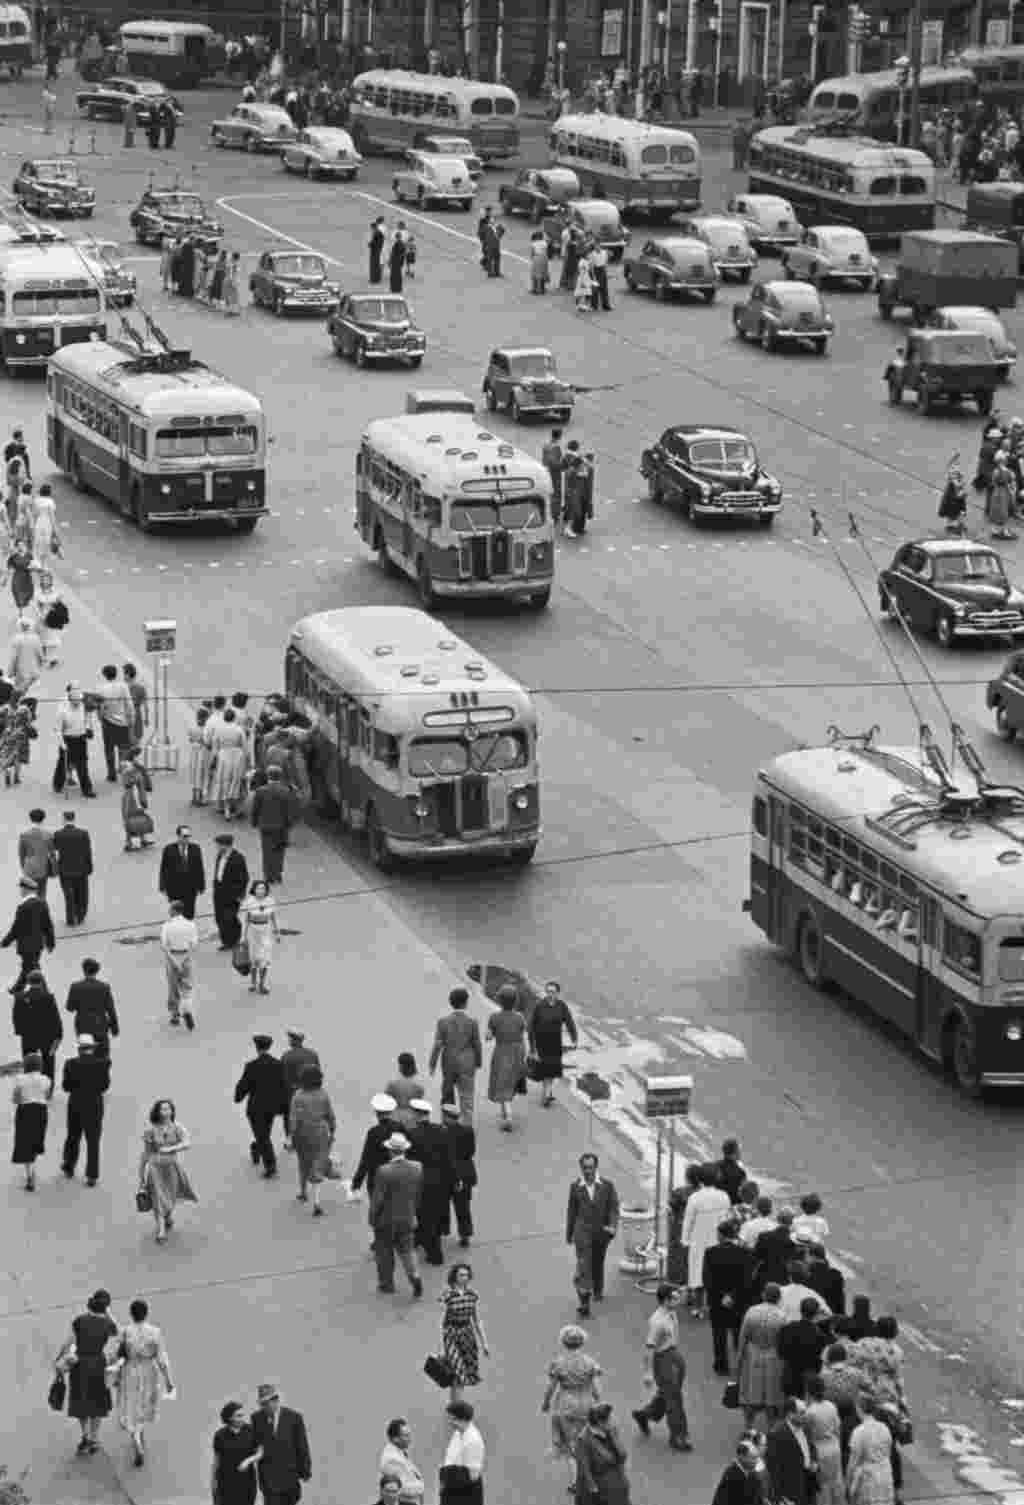 In this shot of Moscow in June 1957, the city is bustling and full of trolleybuses.